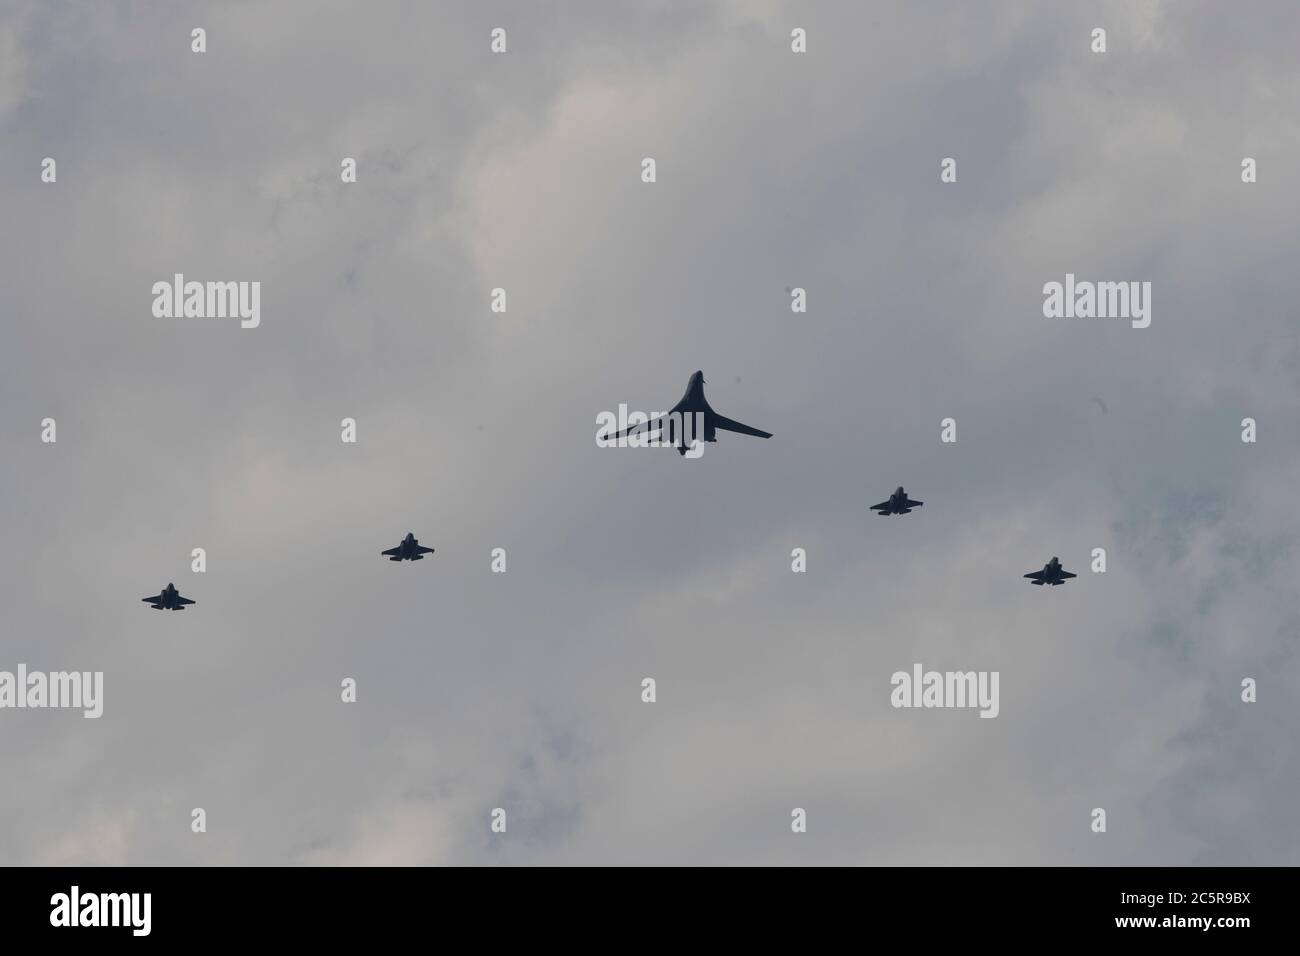 Jersey City, New Jersey, USA. 4th July, 2020. In a 'Salute to America'' on the Fourth of July, a group of U.S. Air Force and U.S. Marine Corps planes ''” including a B-52 bomber fly over the Hudson River in New York.The aircraft included U.S. Air Force Thunderbirds, followed by B-1, B-2 and B-52 bombers, F-15 and F-22 fighters and U.S. Marine Corps F-35 fighters.Â The Flyover cities included Boston, New York, Philadelphia, and Baltimore. Credit: Brian Branch Price/ZUMA Wire/Alamy Live News Stock Photo